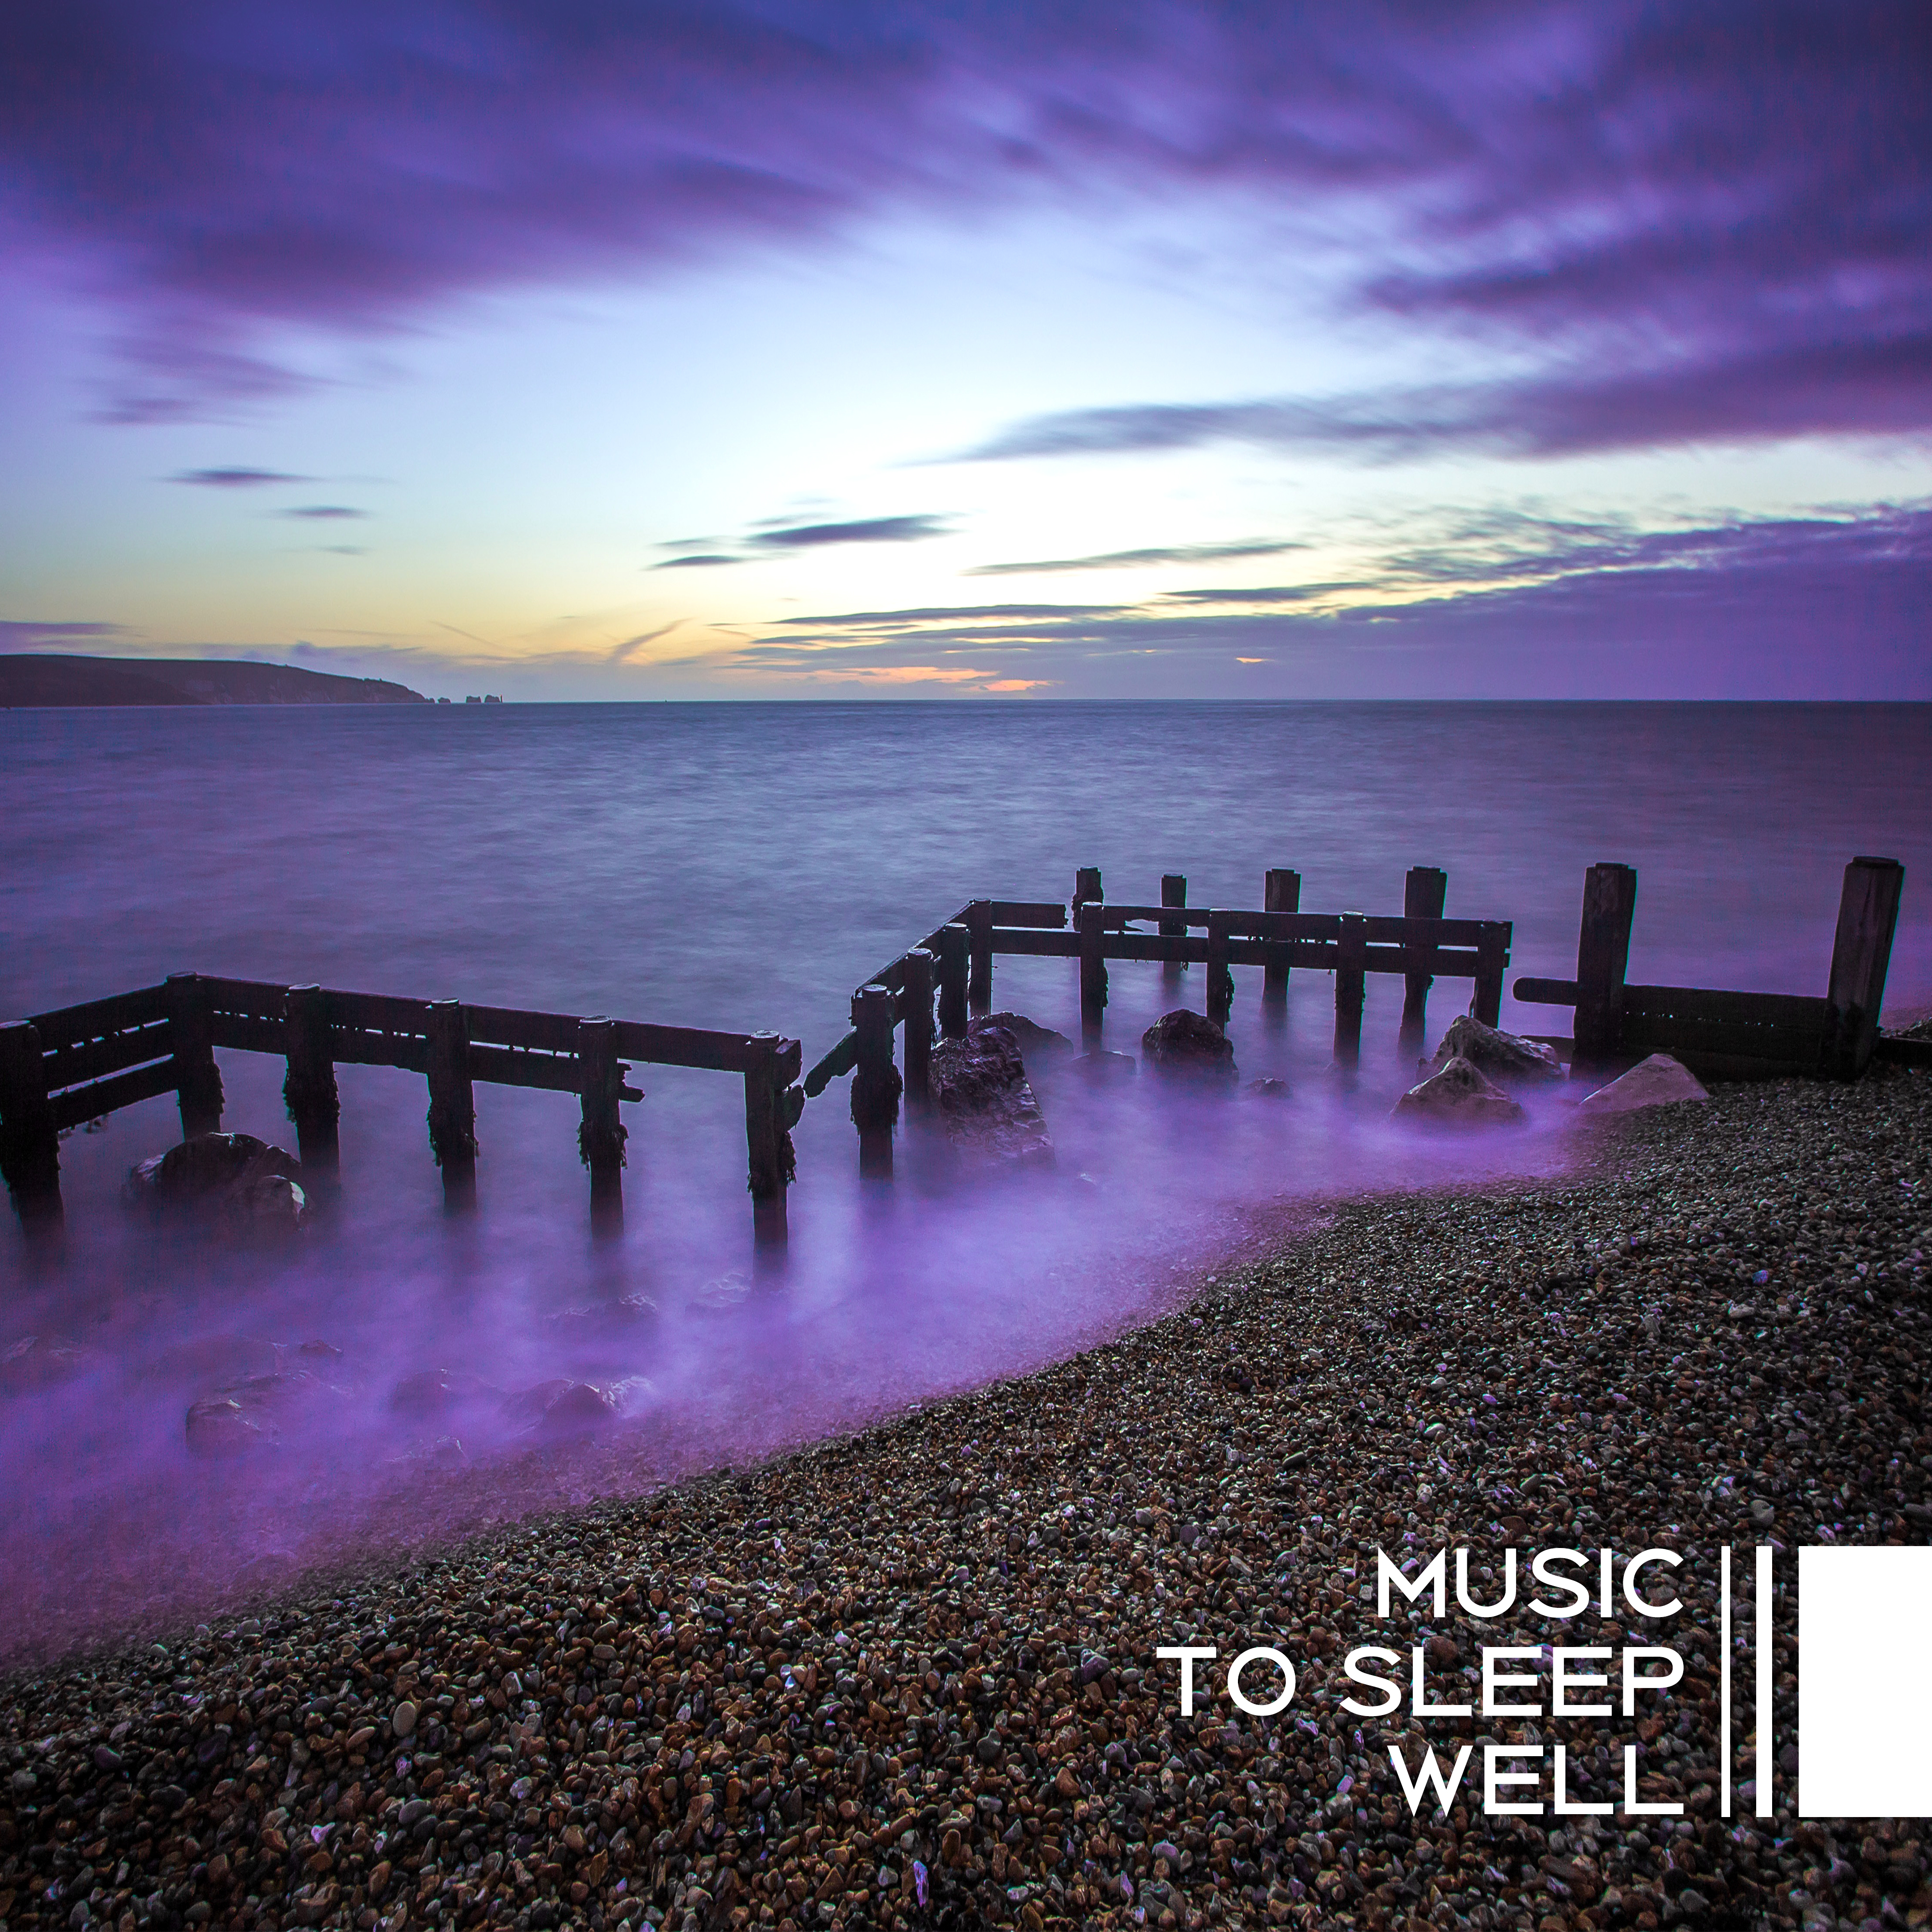 Music to Sleep Well – Calming Sounds to Relax, Peaceful Night, Relax & Sleep, Bedtime Music